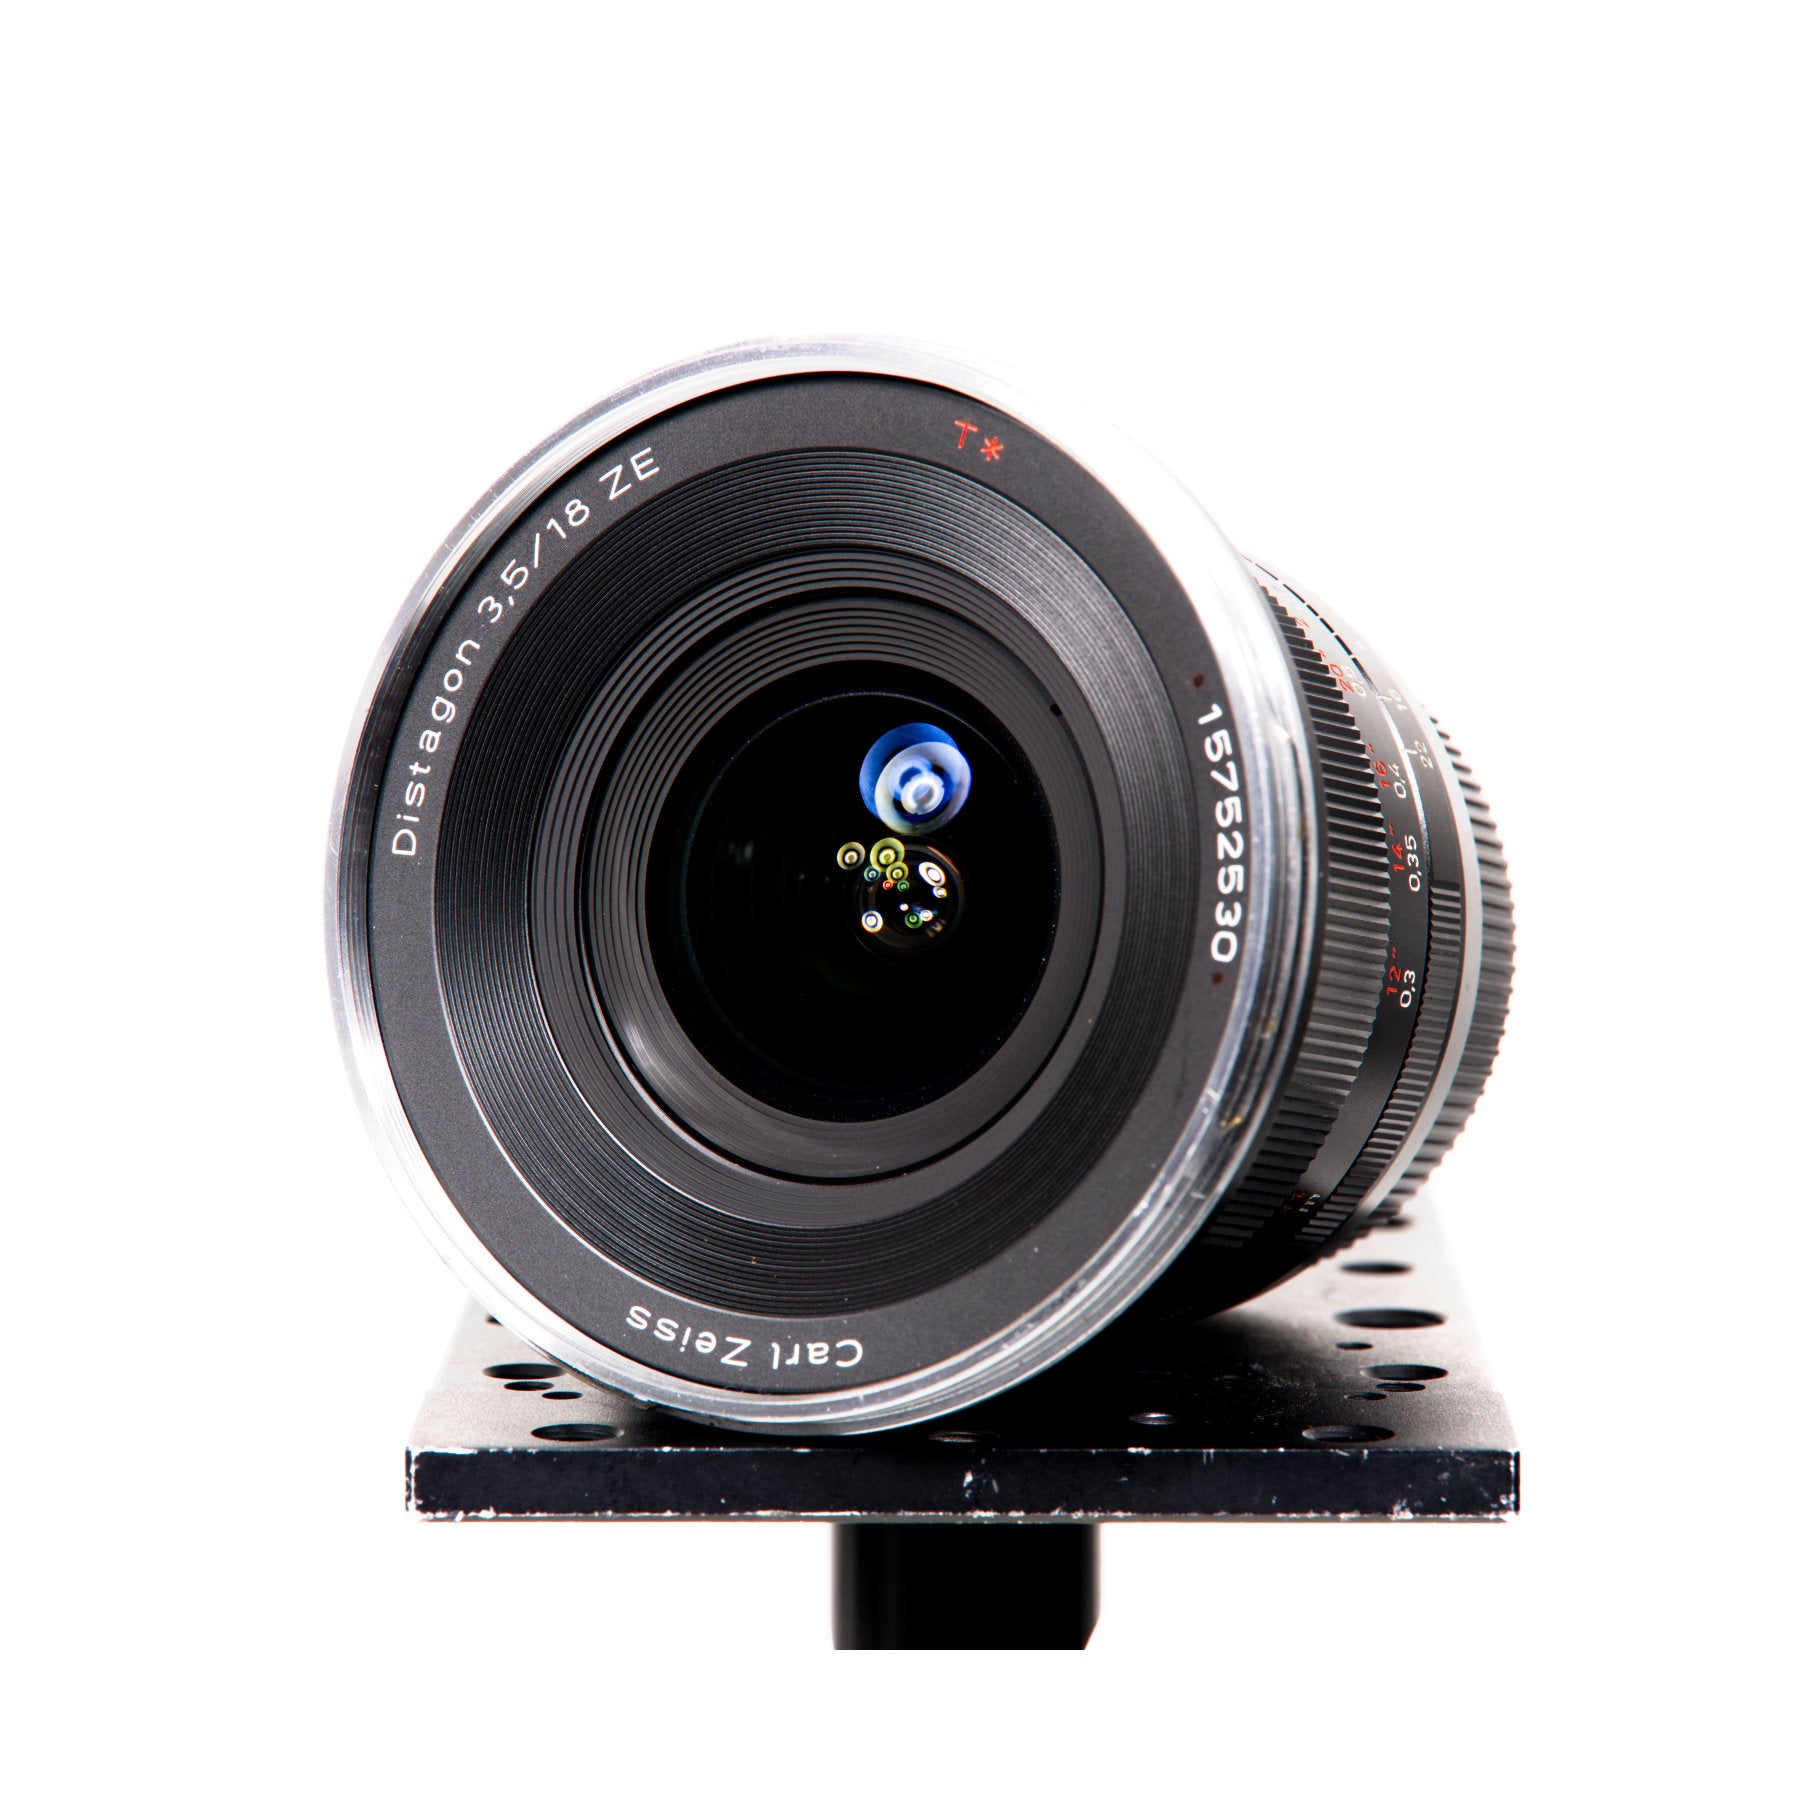 Buy ZEISS Distagon T 18mm f/3.5 ZE Lens For Canon at Topic Store